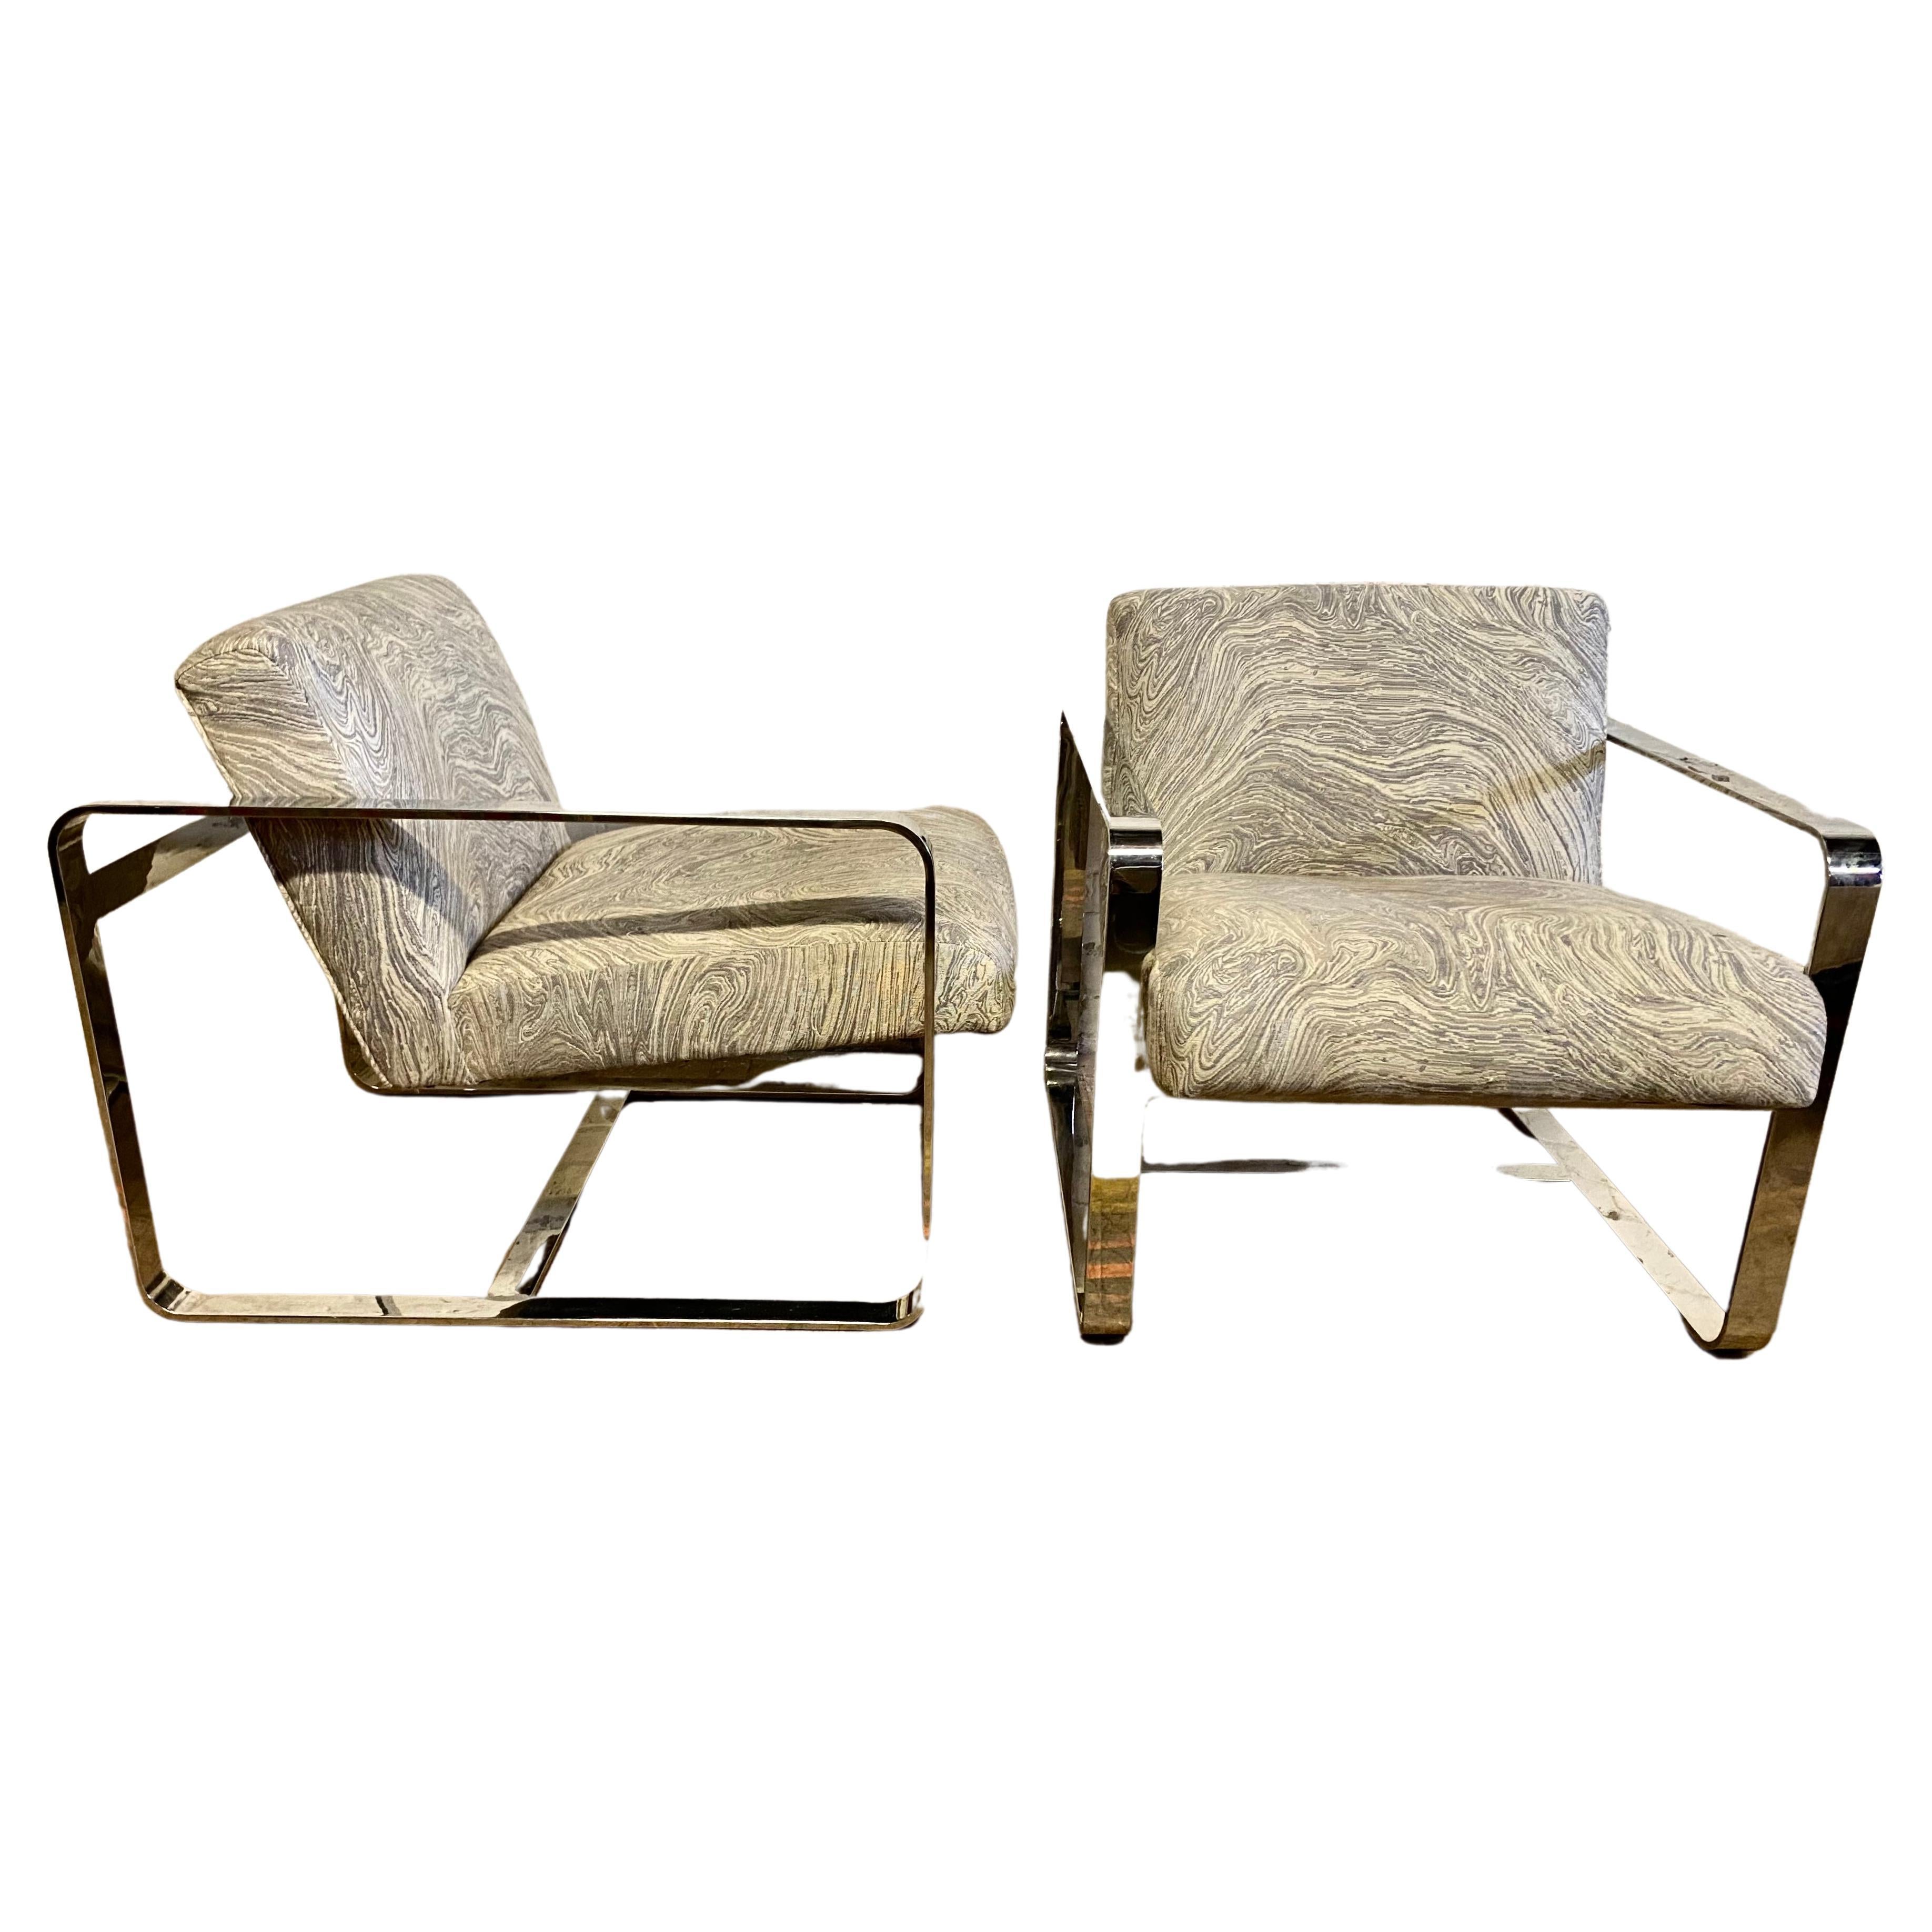 Mitchell Gold & Bob Williams Modernist, Art Deco Style Lounge Chairs For Sale